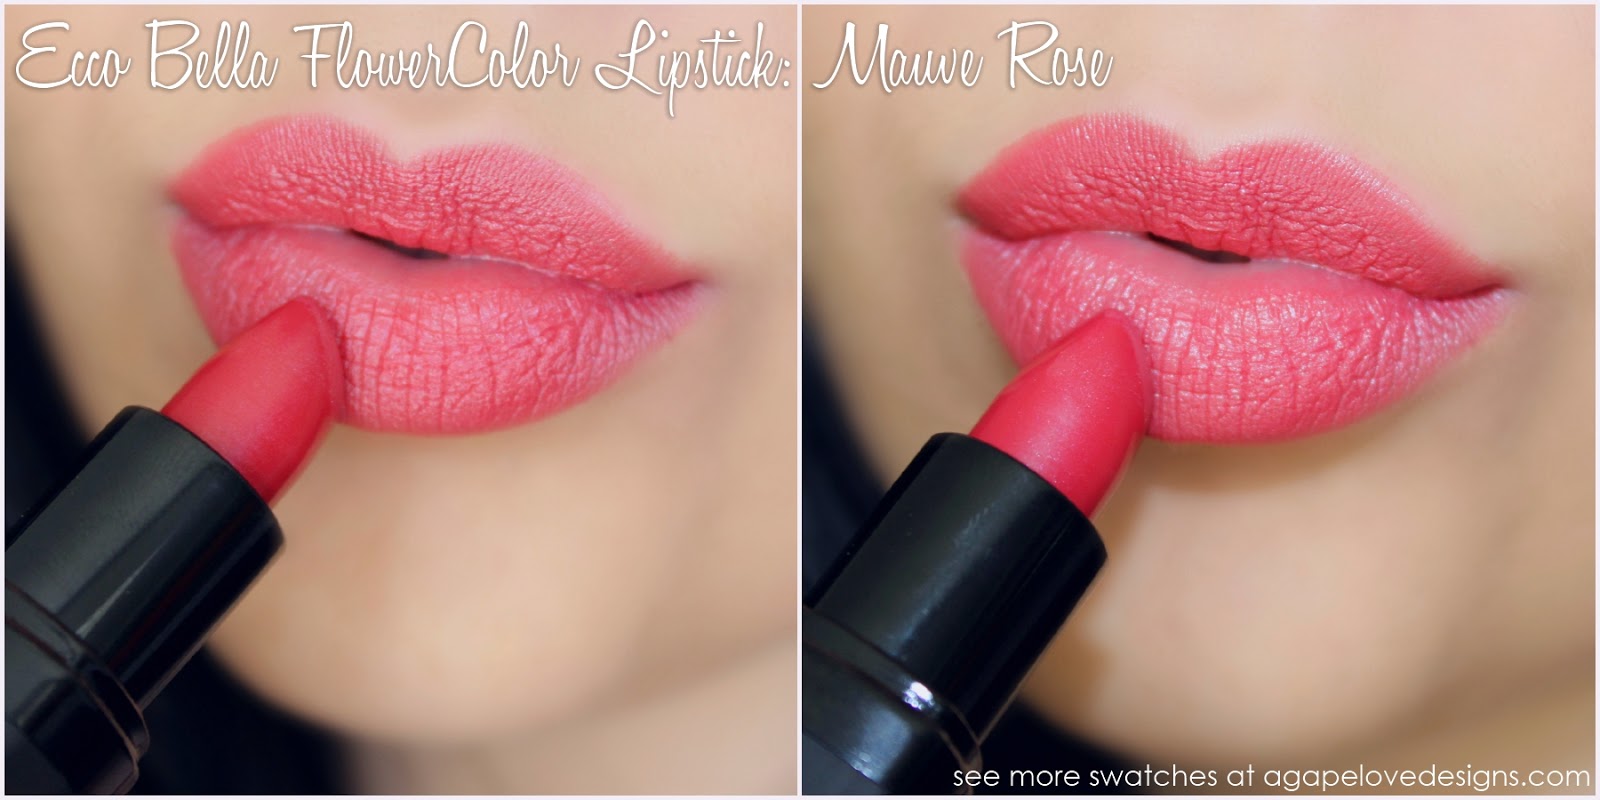 Love Designs: Ecco Bella FlowerColor (Rose Shades) Review Swatches